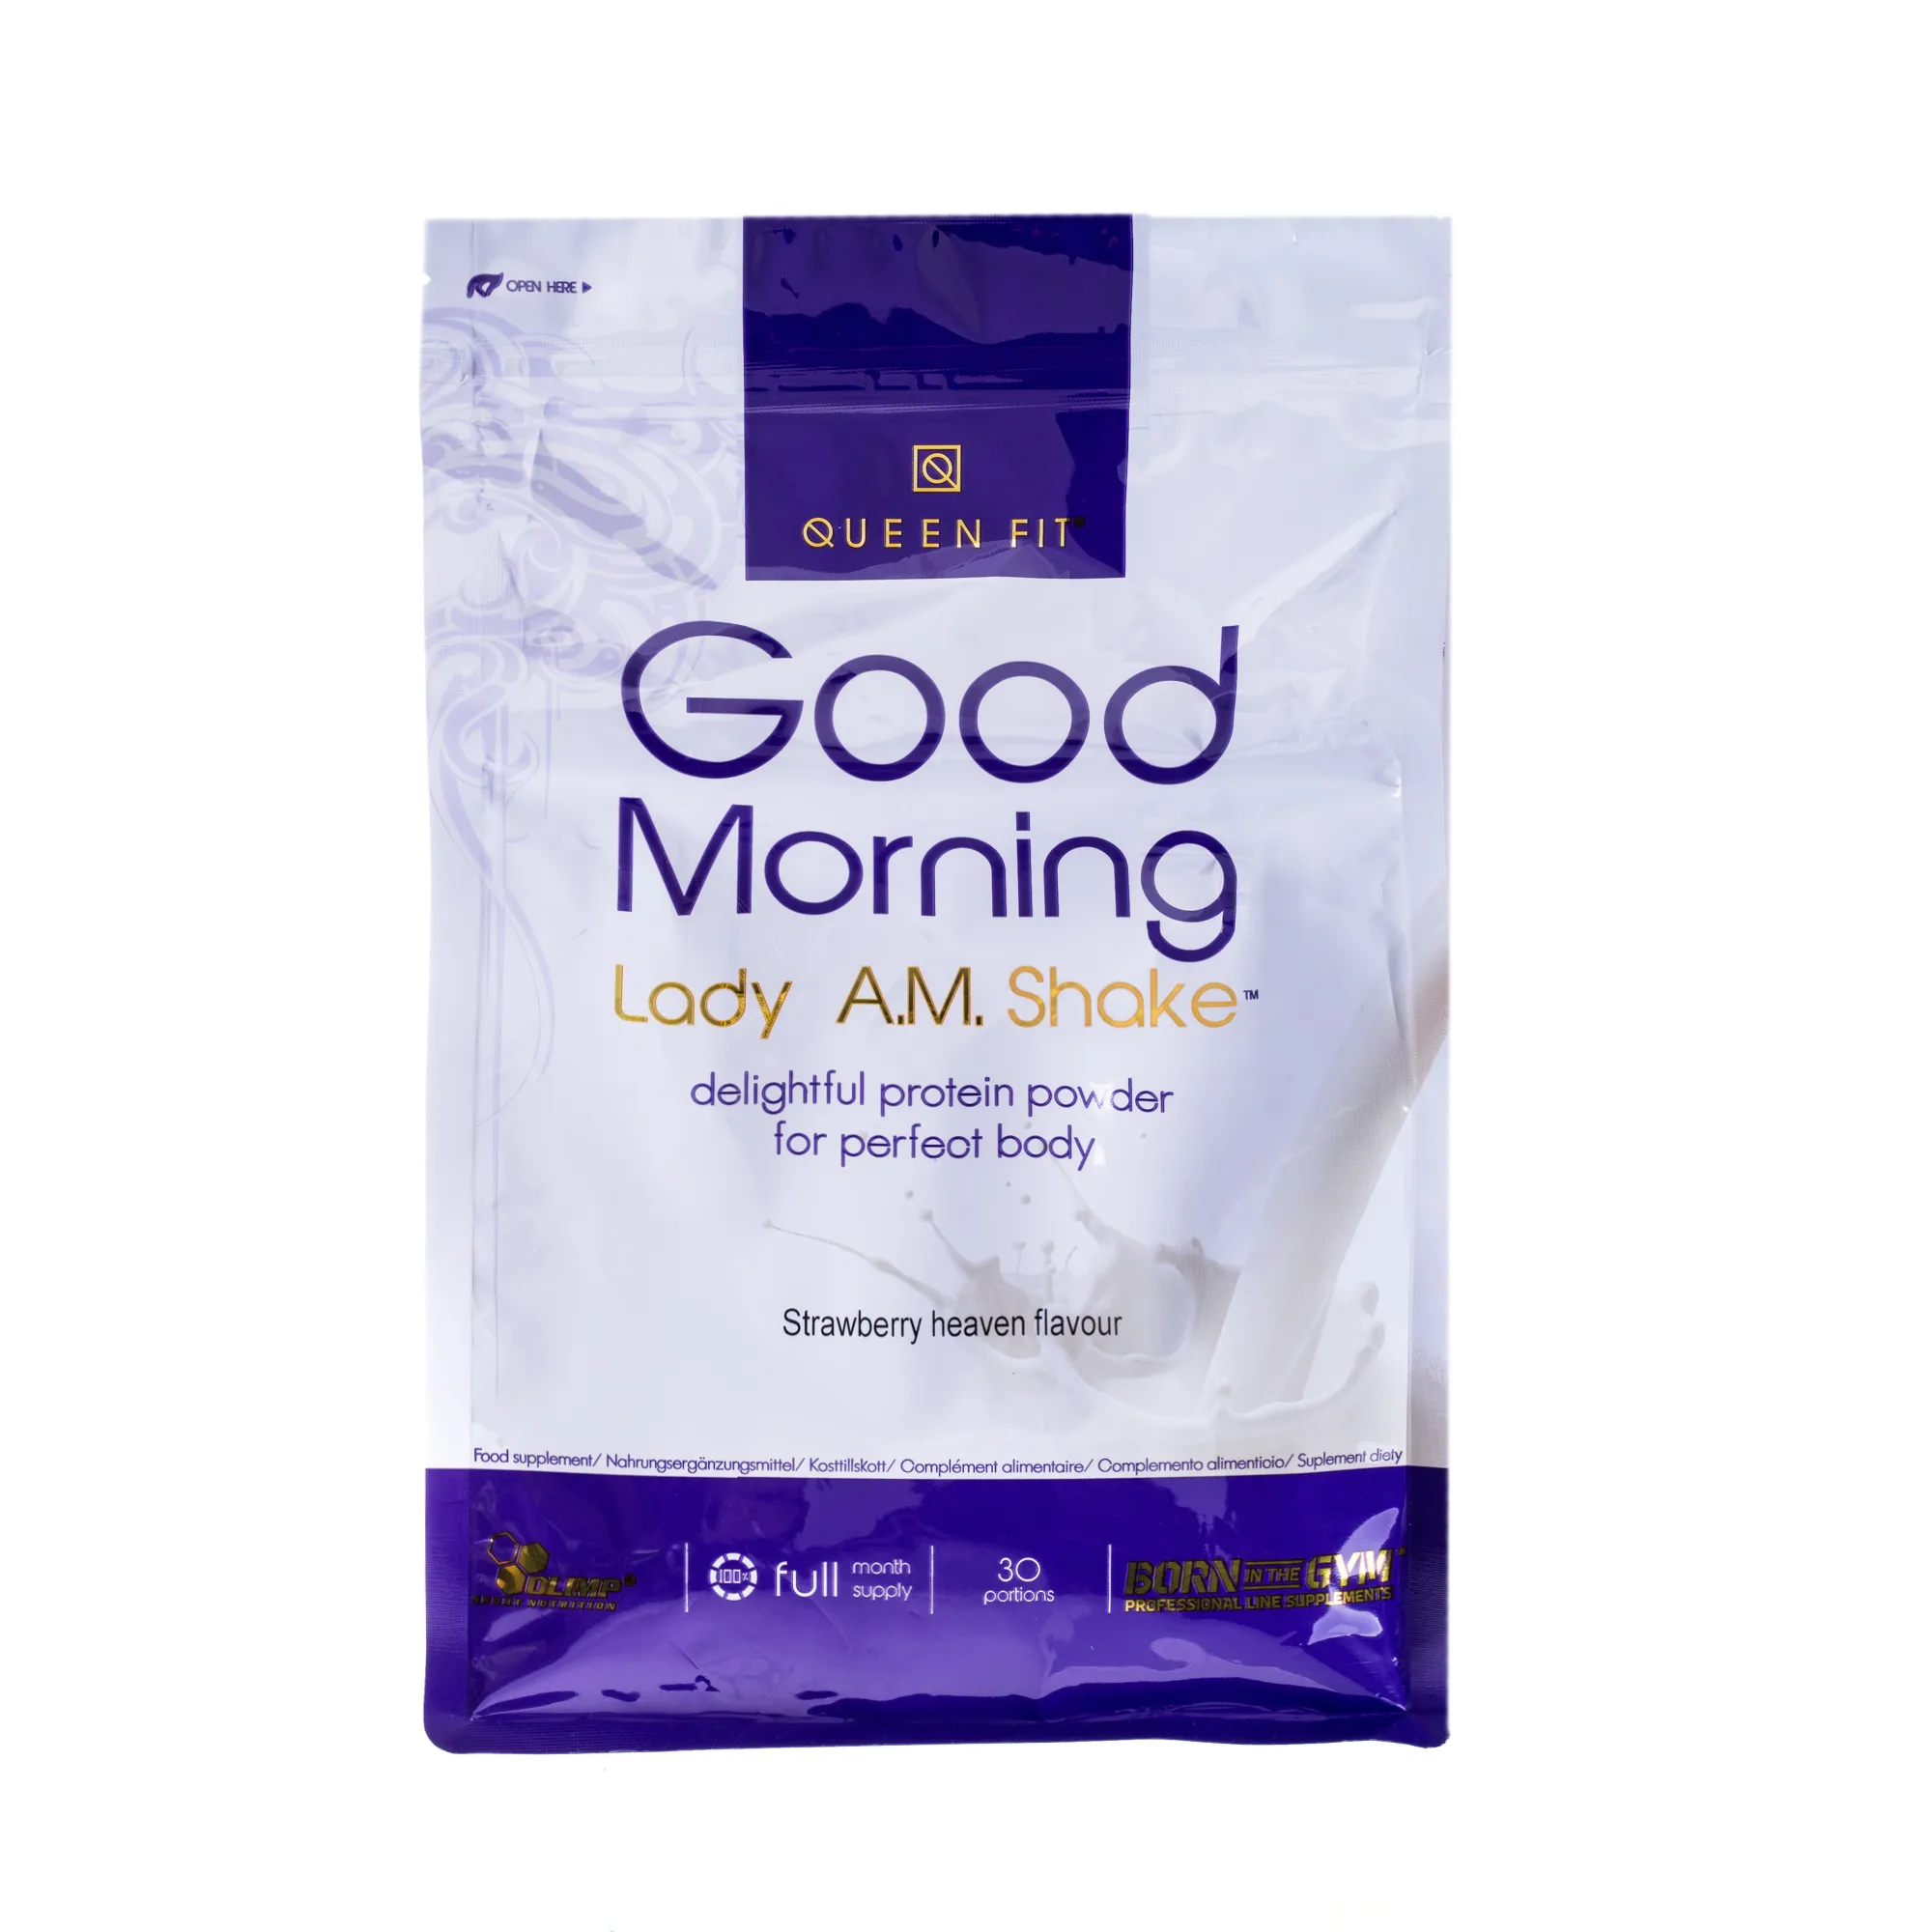 Olimp Good Morning Lady A.M. Shake, suplement diety, smak truskawkowy, 720 g 